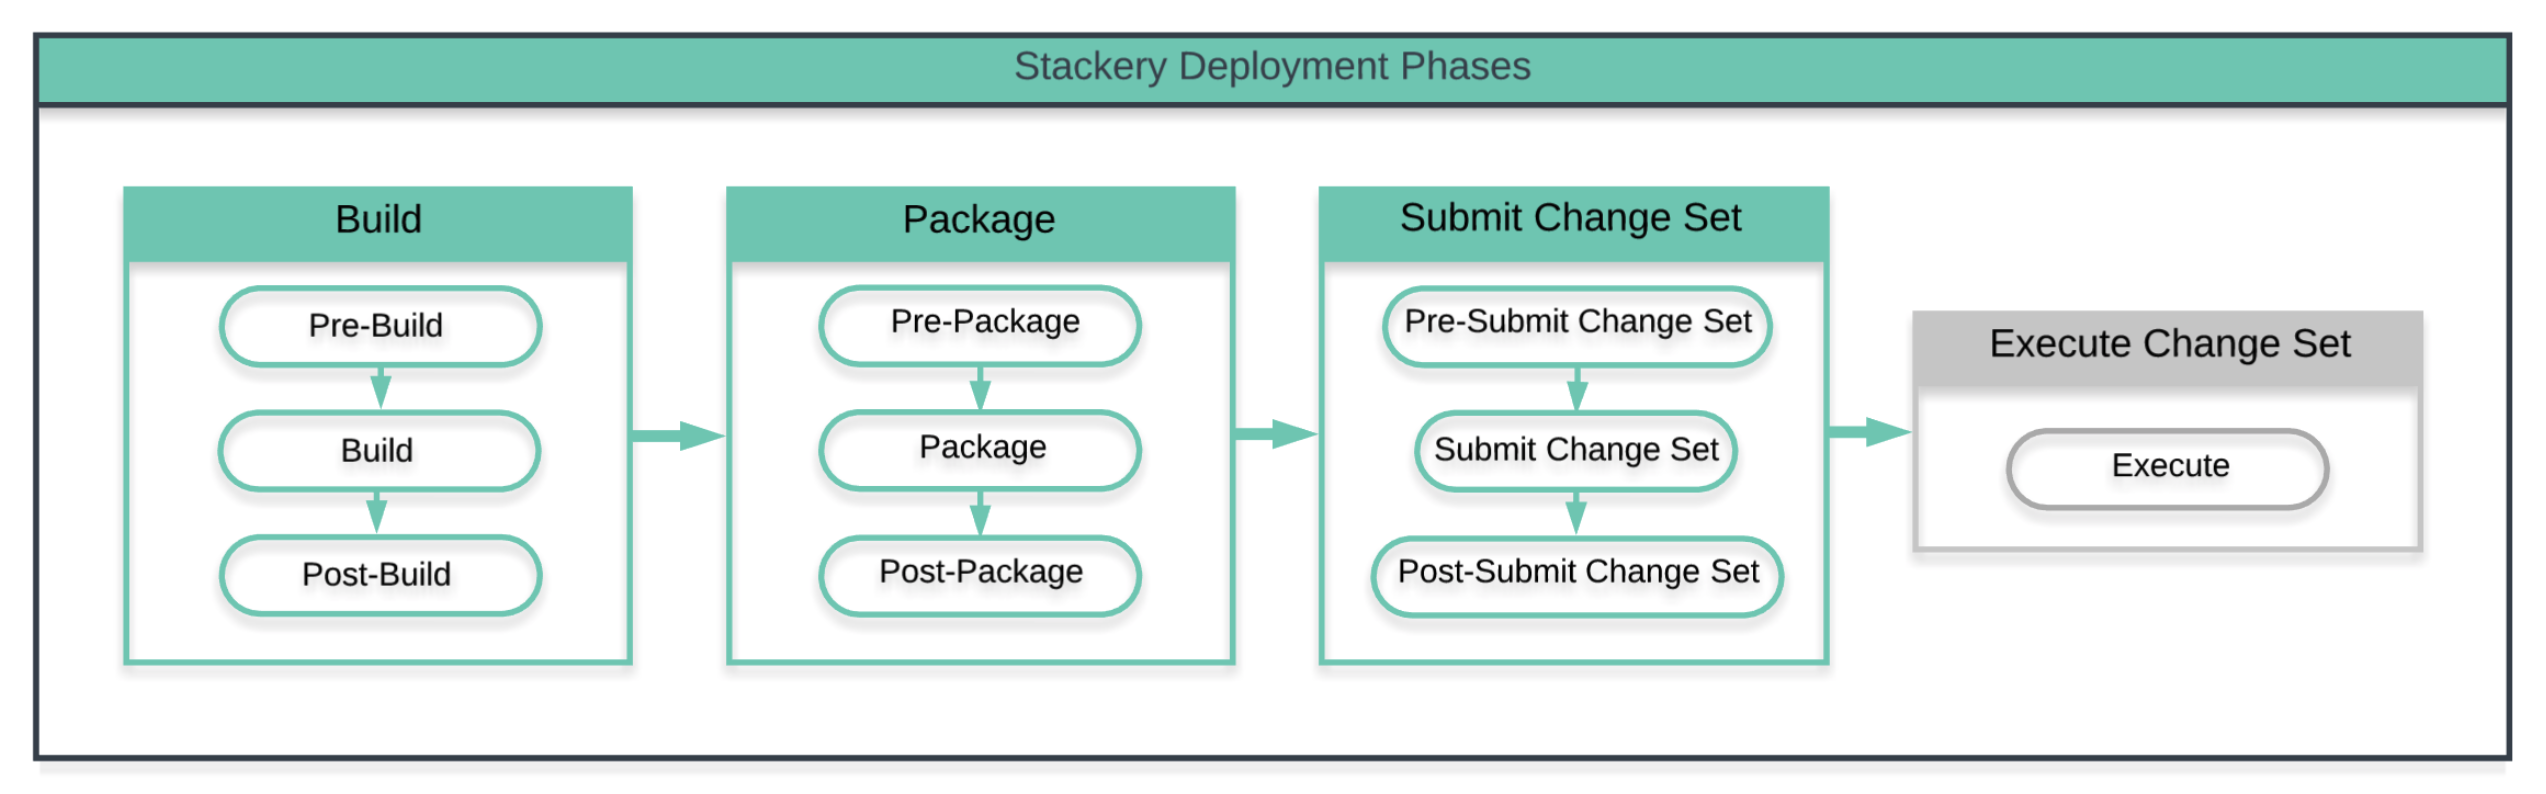 The Stack Overview